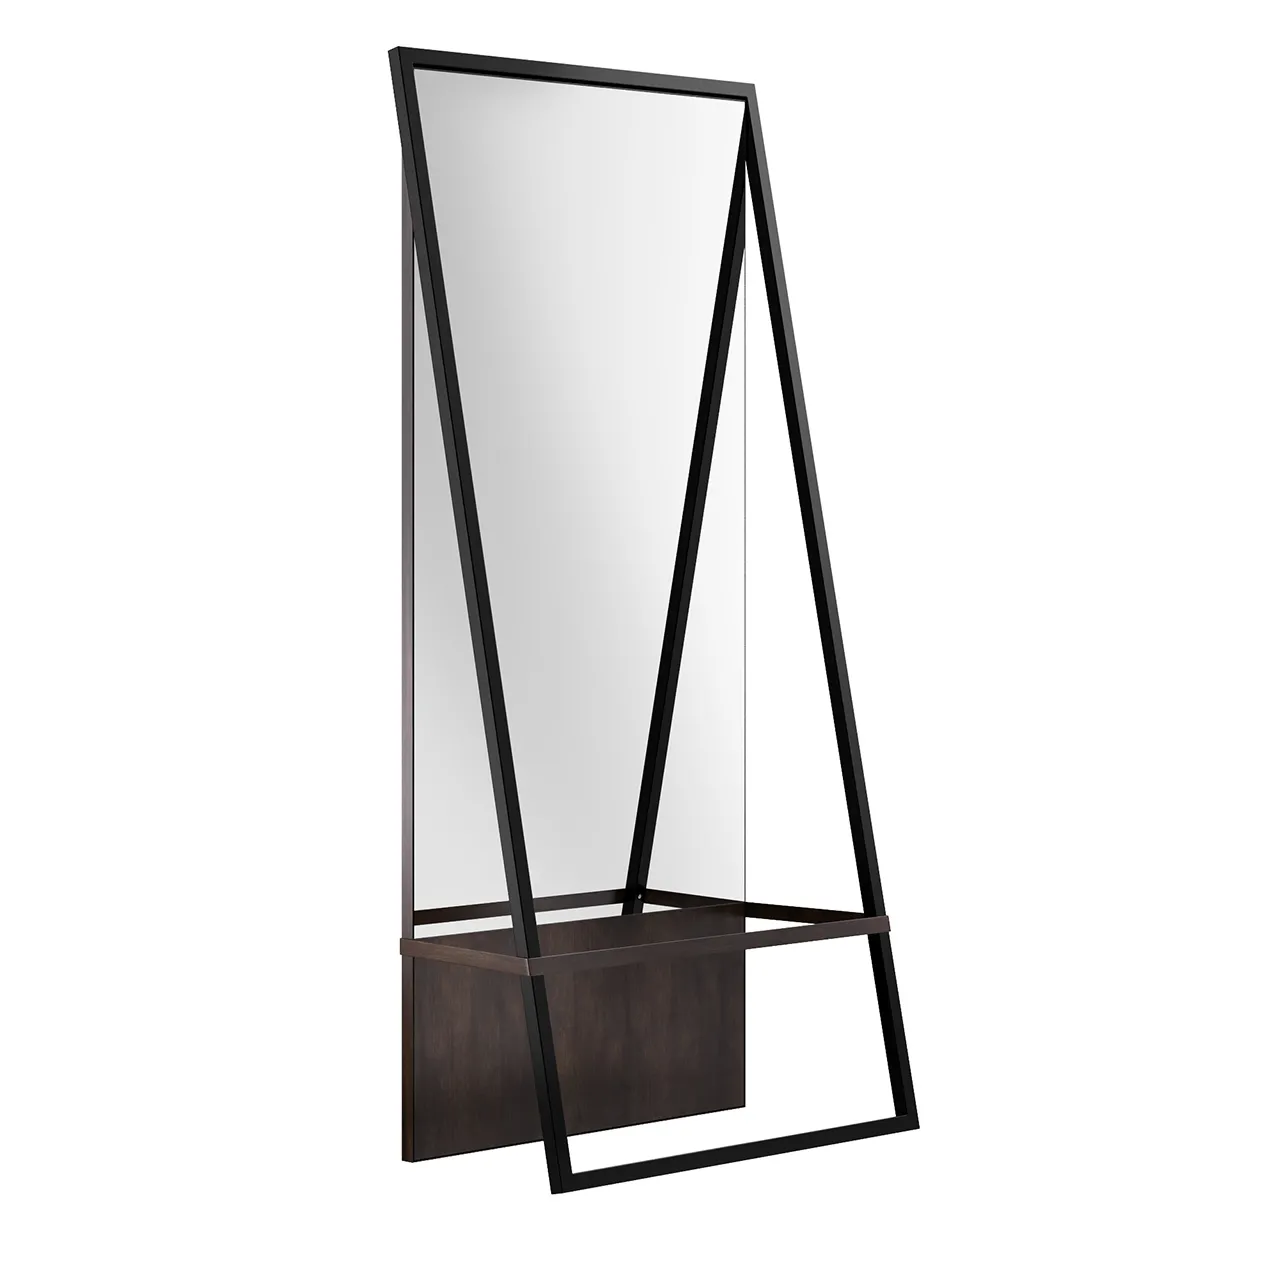 Accessories – tale-freestanding-rectangular-mirror-by-potocco